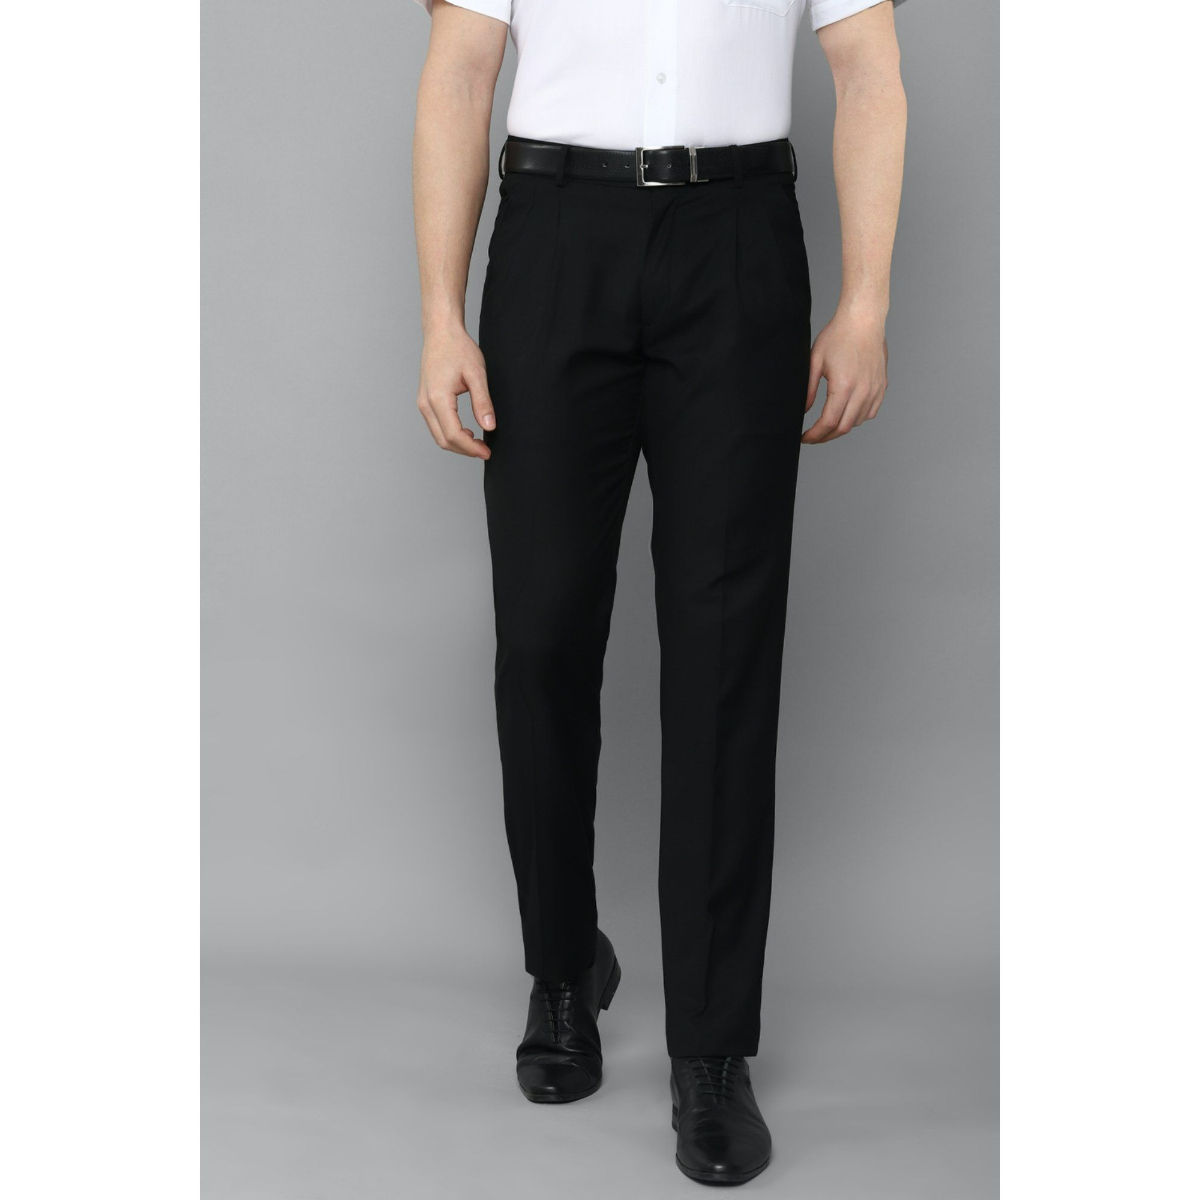 Louis Philippe Sport Printed Trousers  Buy Louis Philippe Sport Printed Trousers  online in India